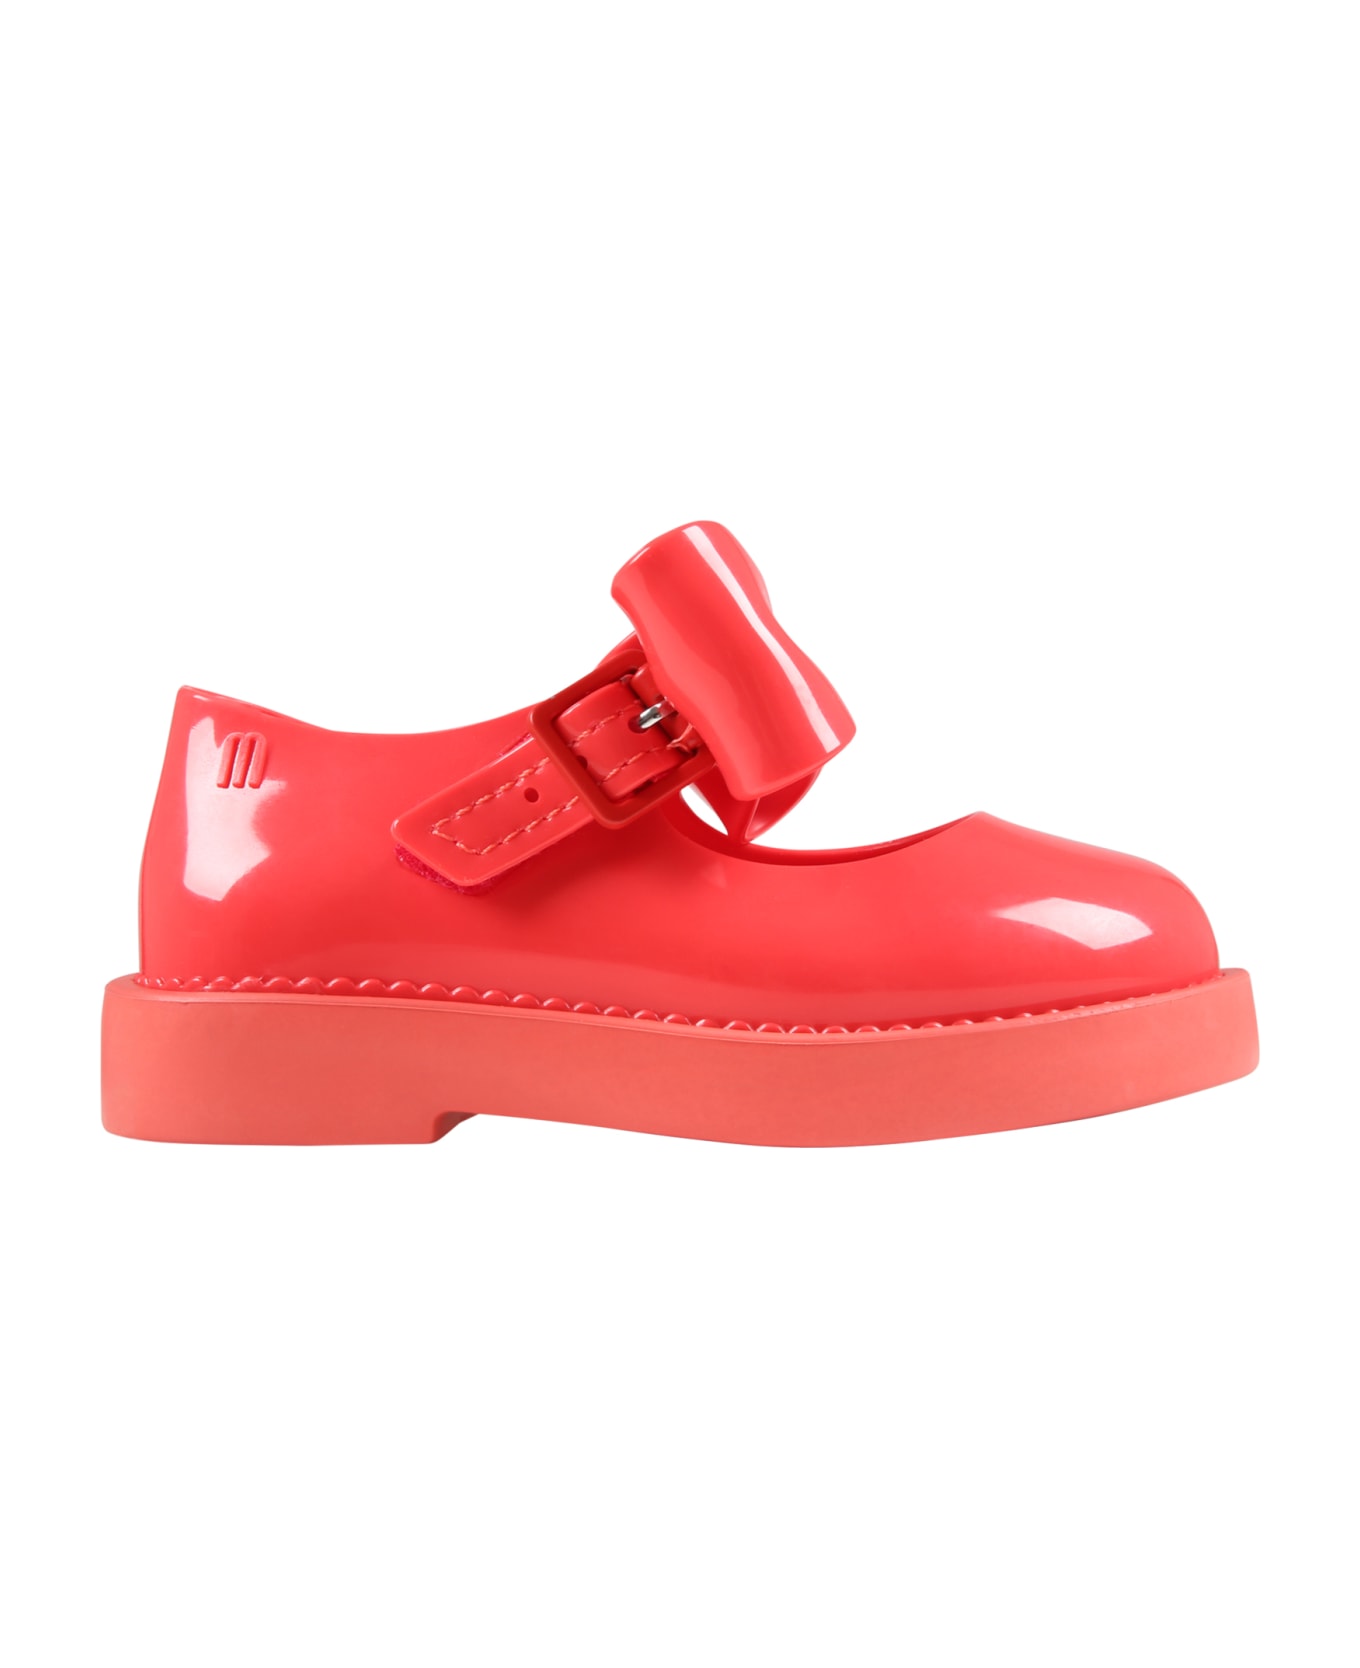 Melissa Red Ballerina Flats For Girl With Bow - Red